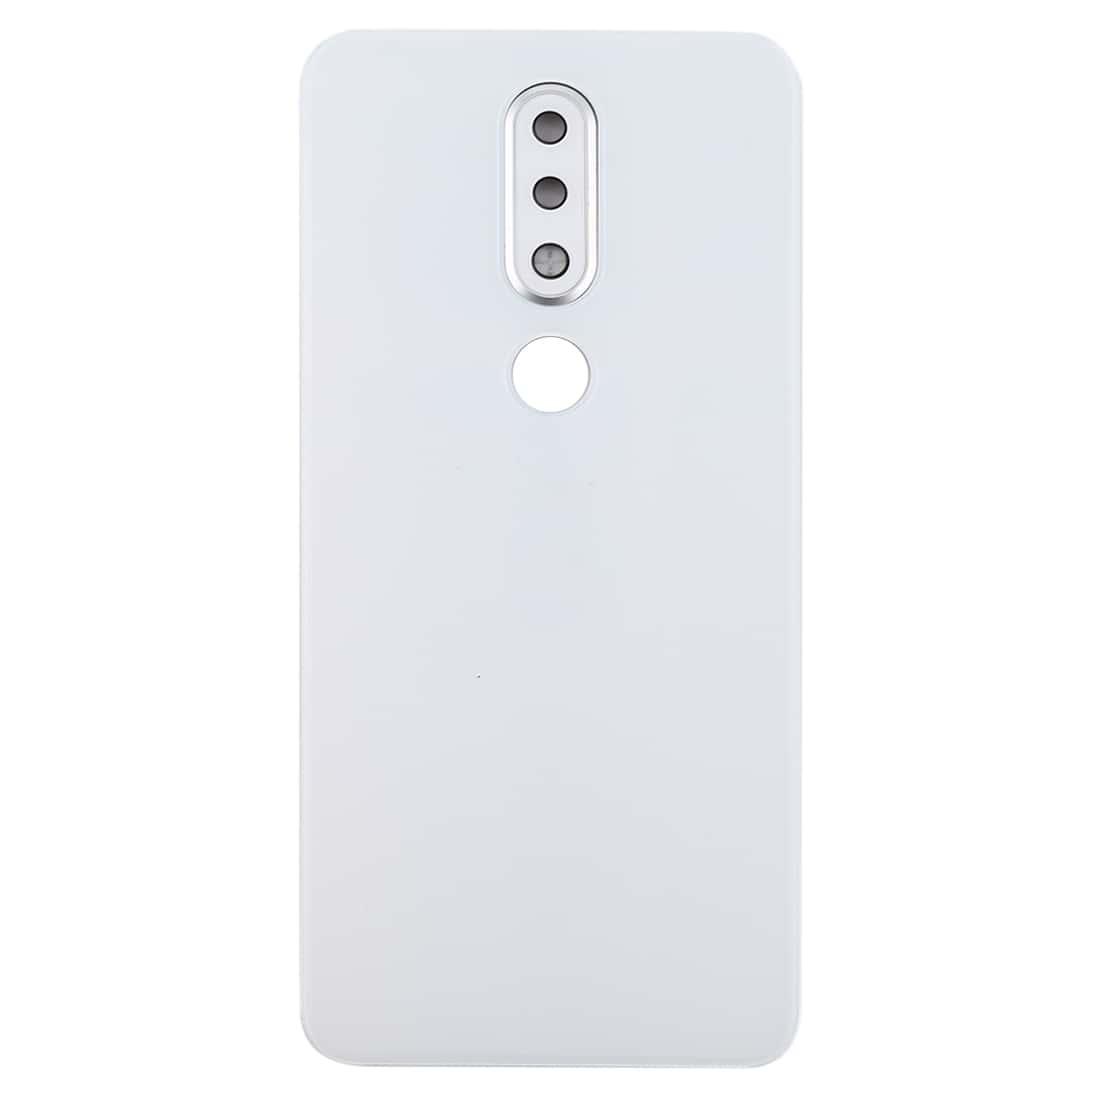 Back Glass Panel for Nokia X6 2018 6.1 Plus White with Camera Lens